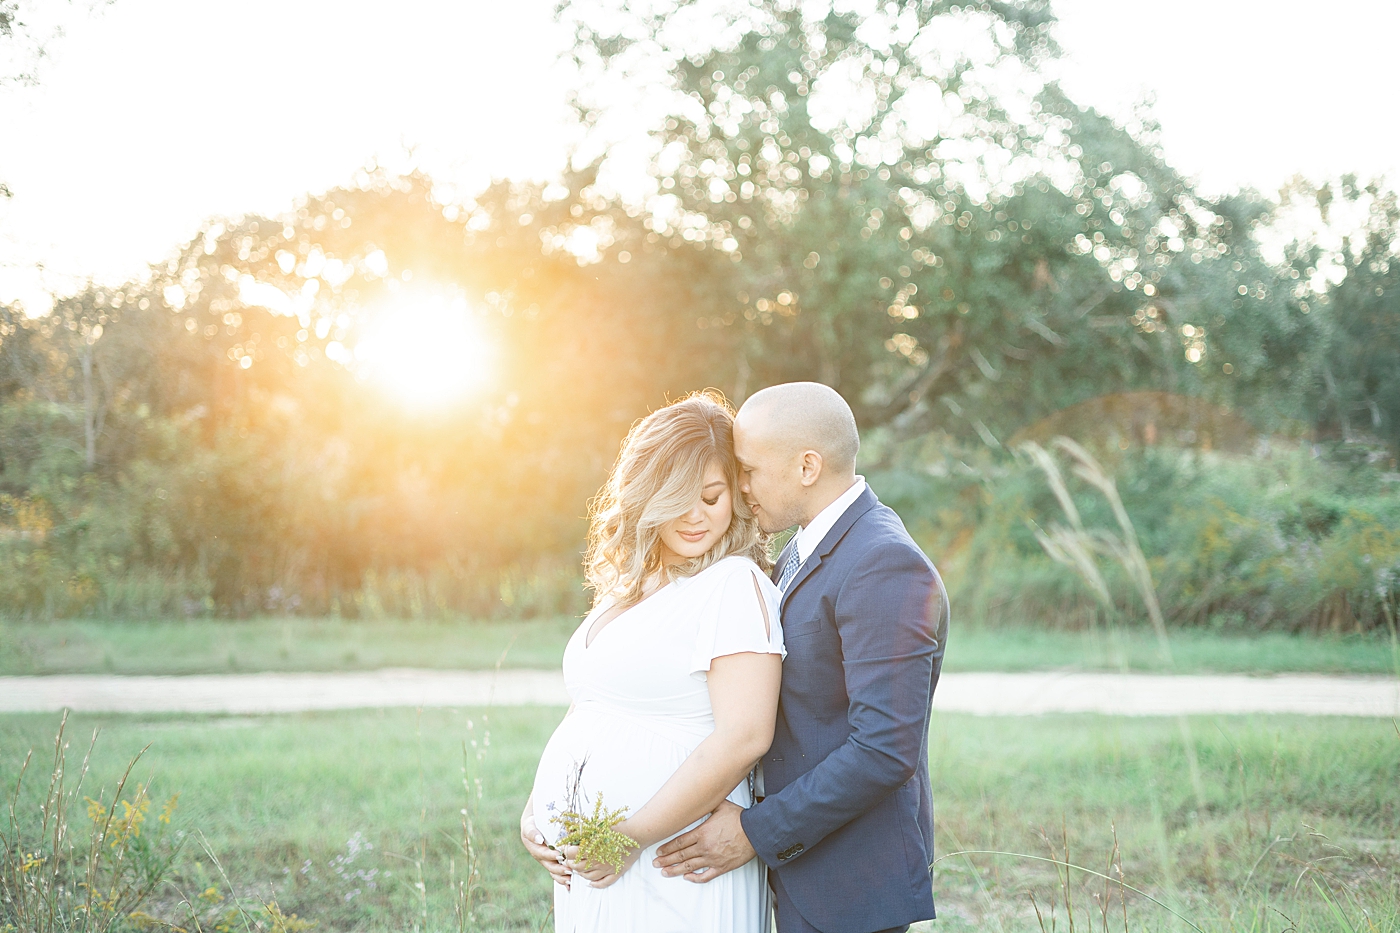 Mom and dad to be snuggling in a field | Photo by Gulfport MS Maternity and Newborn Photographer Little Sunshine Photography 